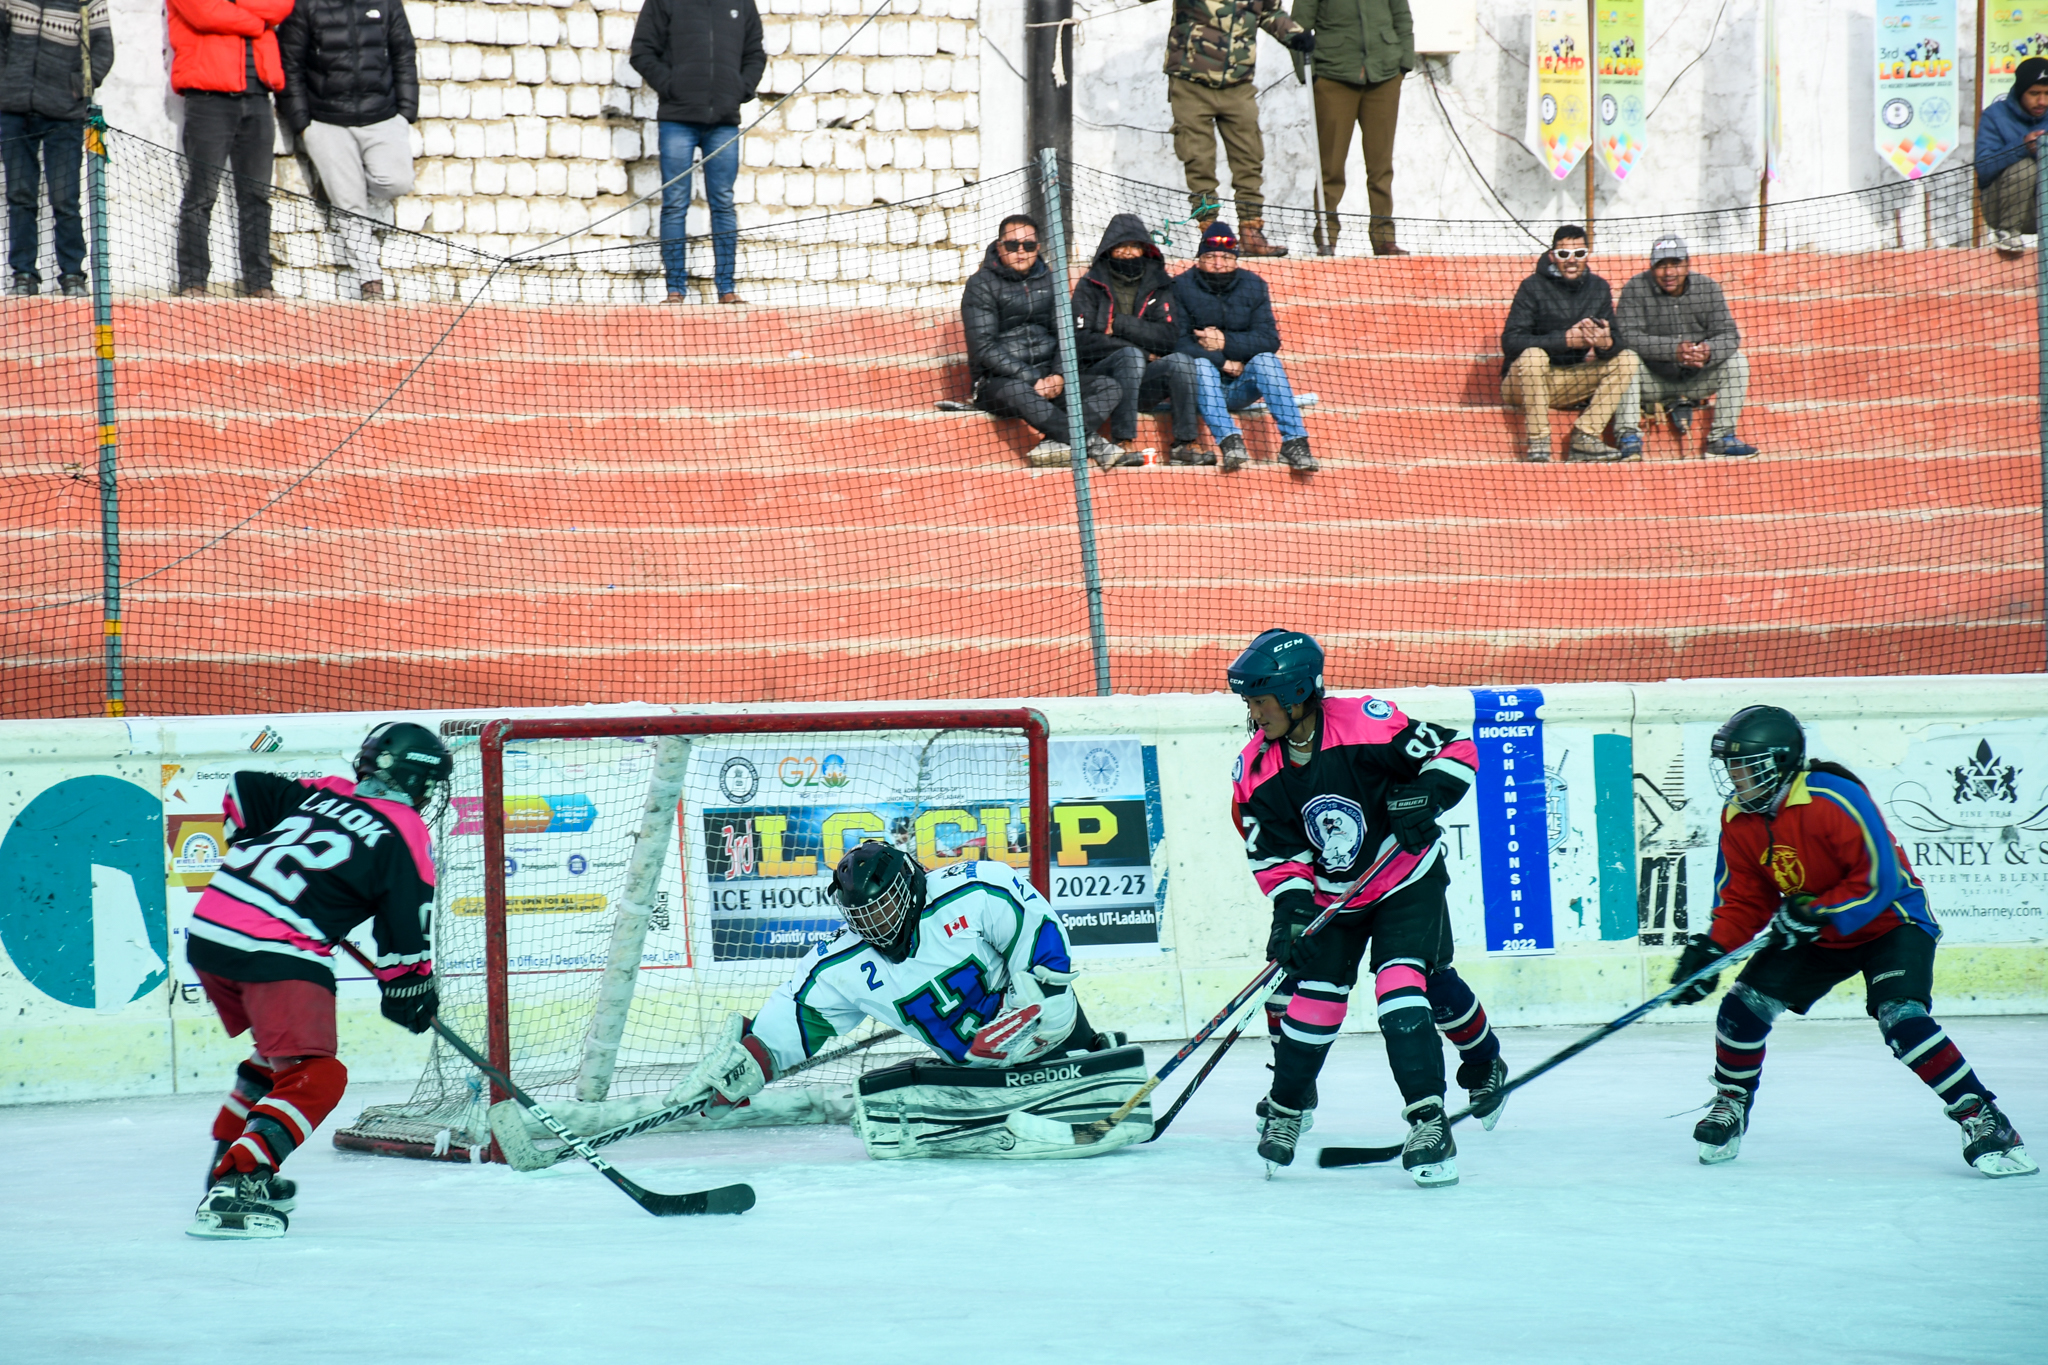 3rd LG Cup Ice Hockey Championship 2022-23 commences